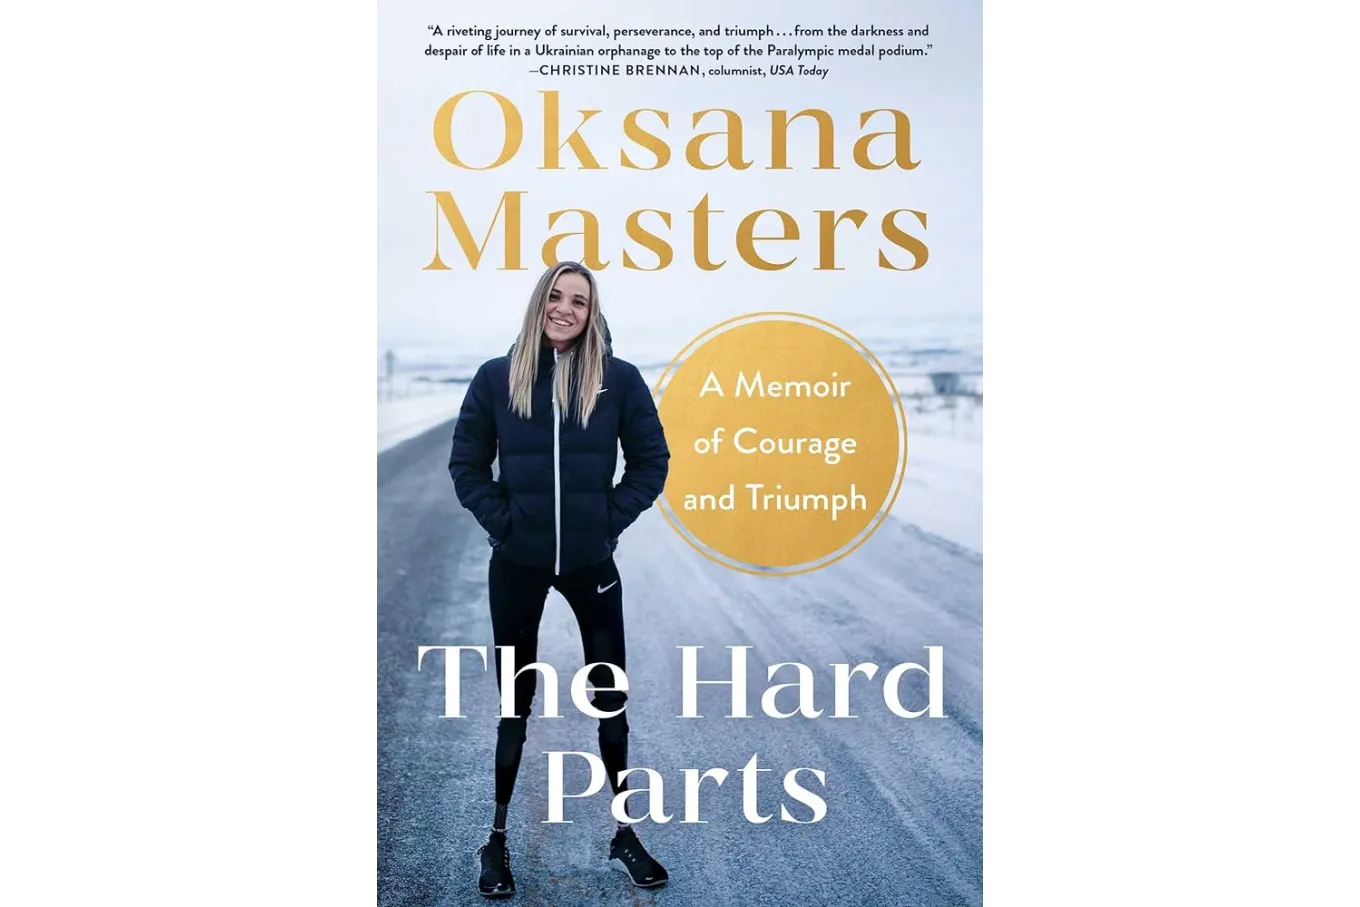 Cover of the hard parts